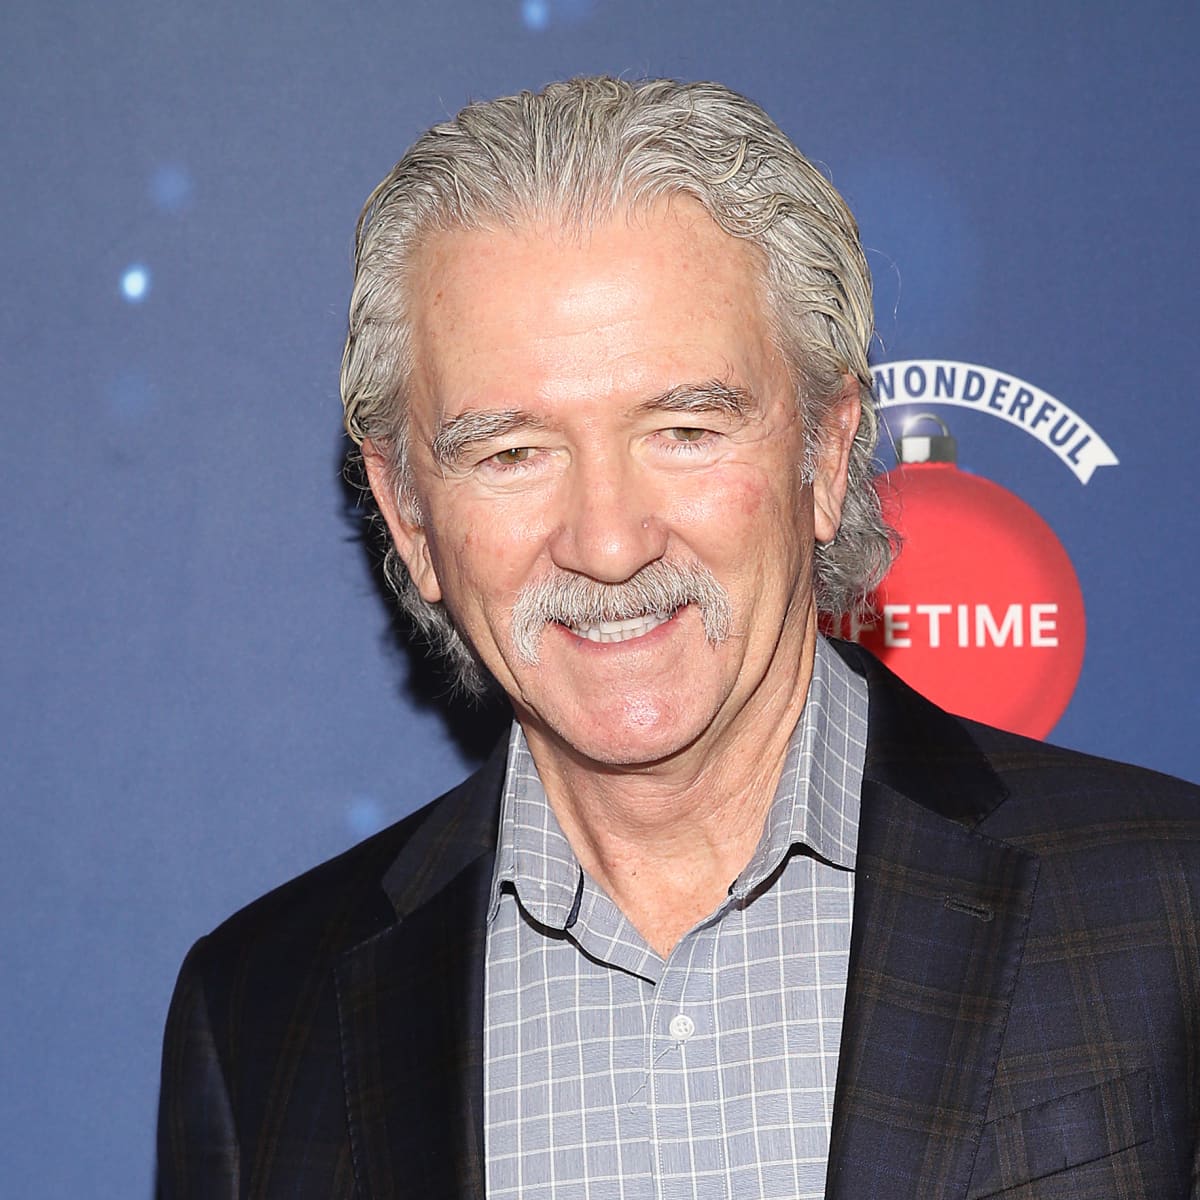 The 73-year old son of father Terence Duffy and mother Marie Duffy Patrick Duffy in 2022 photo. Patrick Duffy earned a  million dollar salary - leaving the net worth at  million in 2022